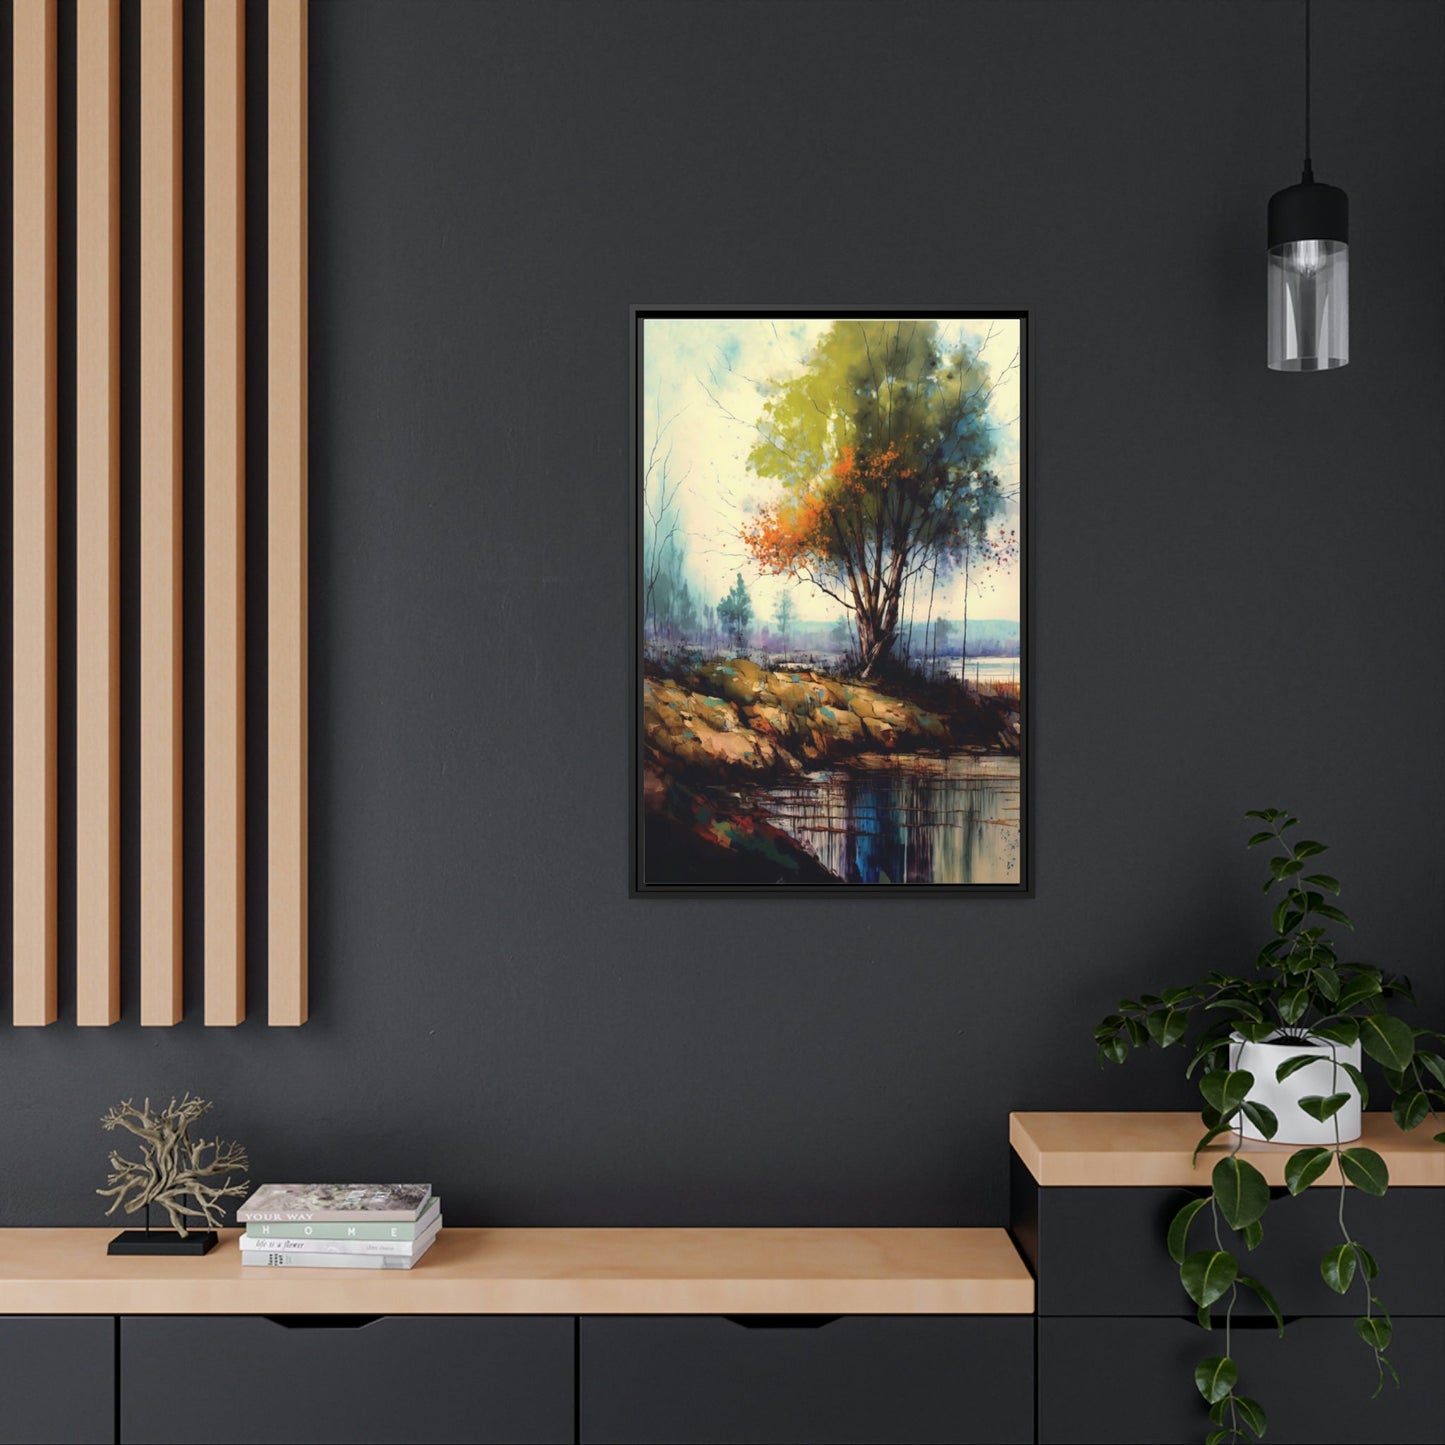 Ethereal Beauty: A Print on Canvas  & Poster of a Sublime Landscape